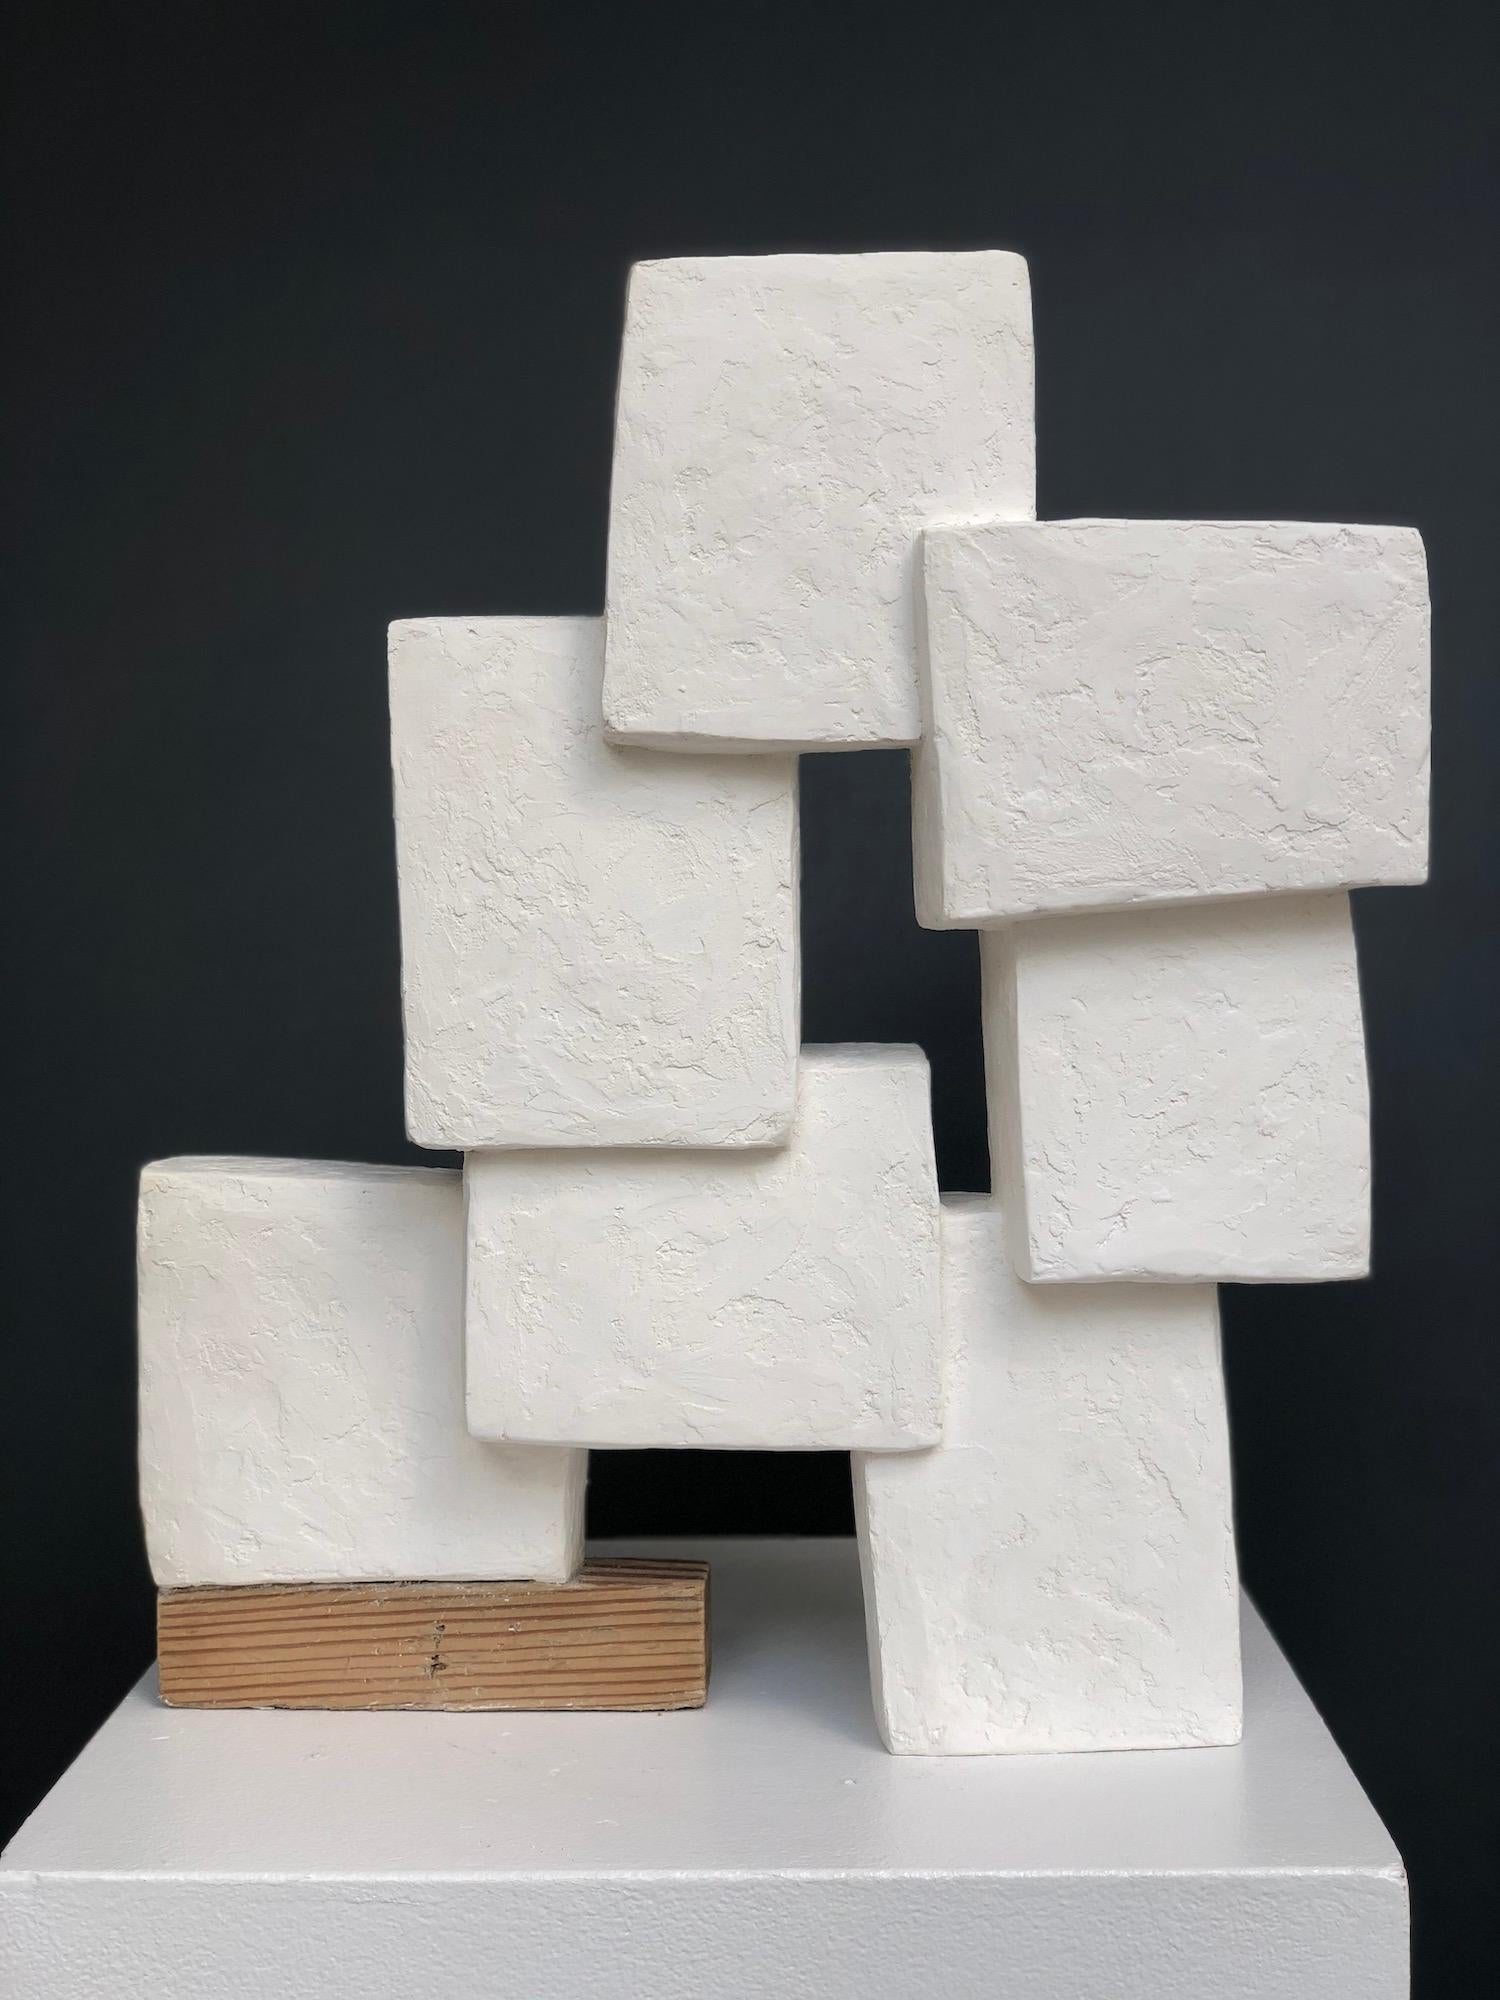 Unity VI by Delphine Brabant - Contemporary abstract geometric sculpture For Sale 2